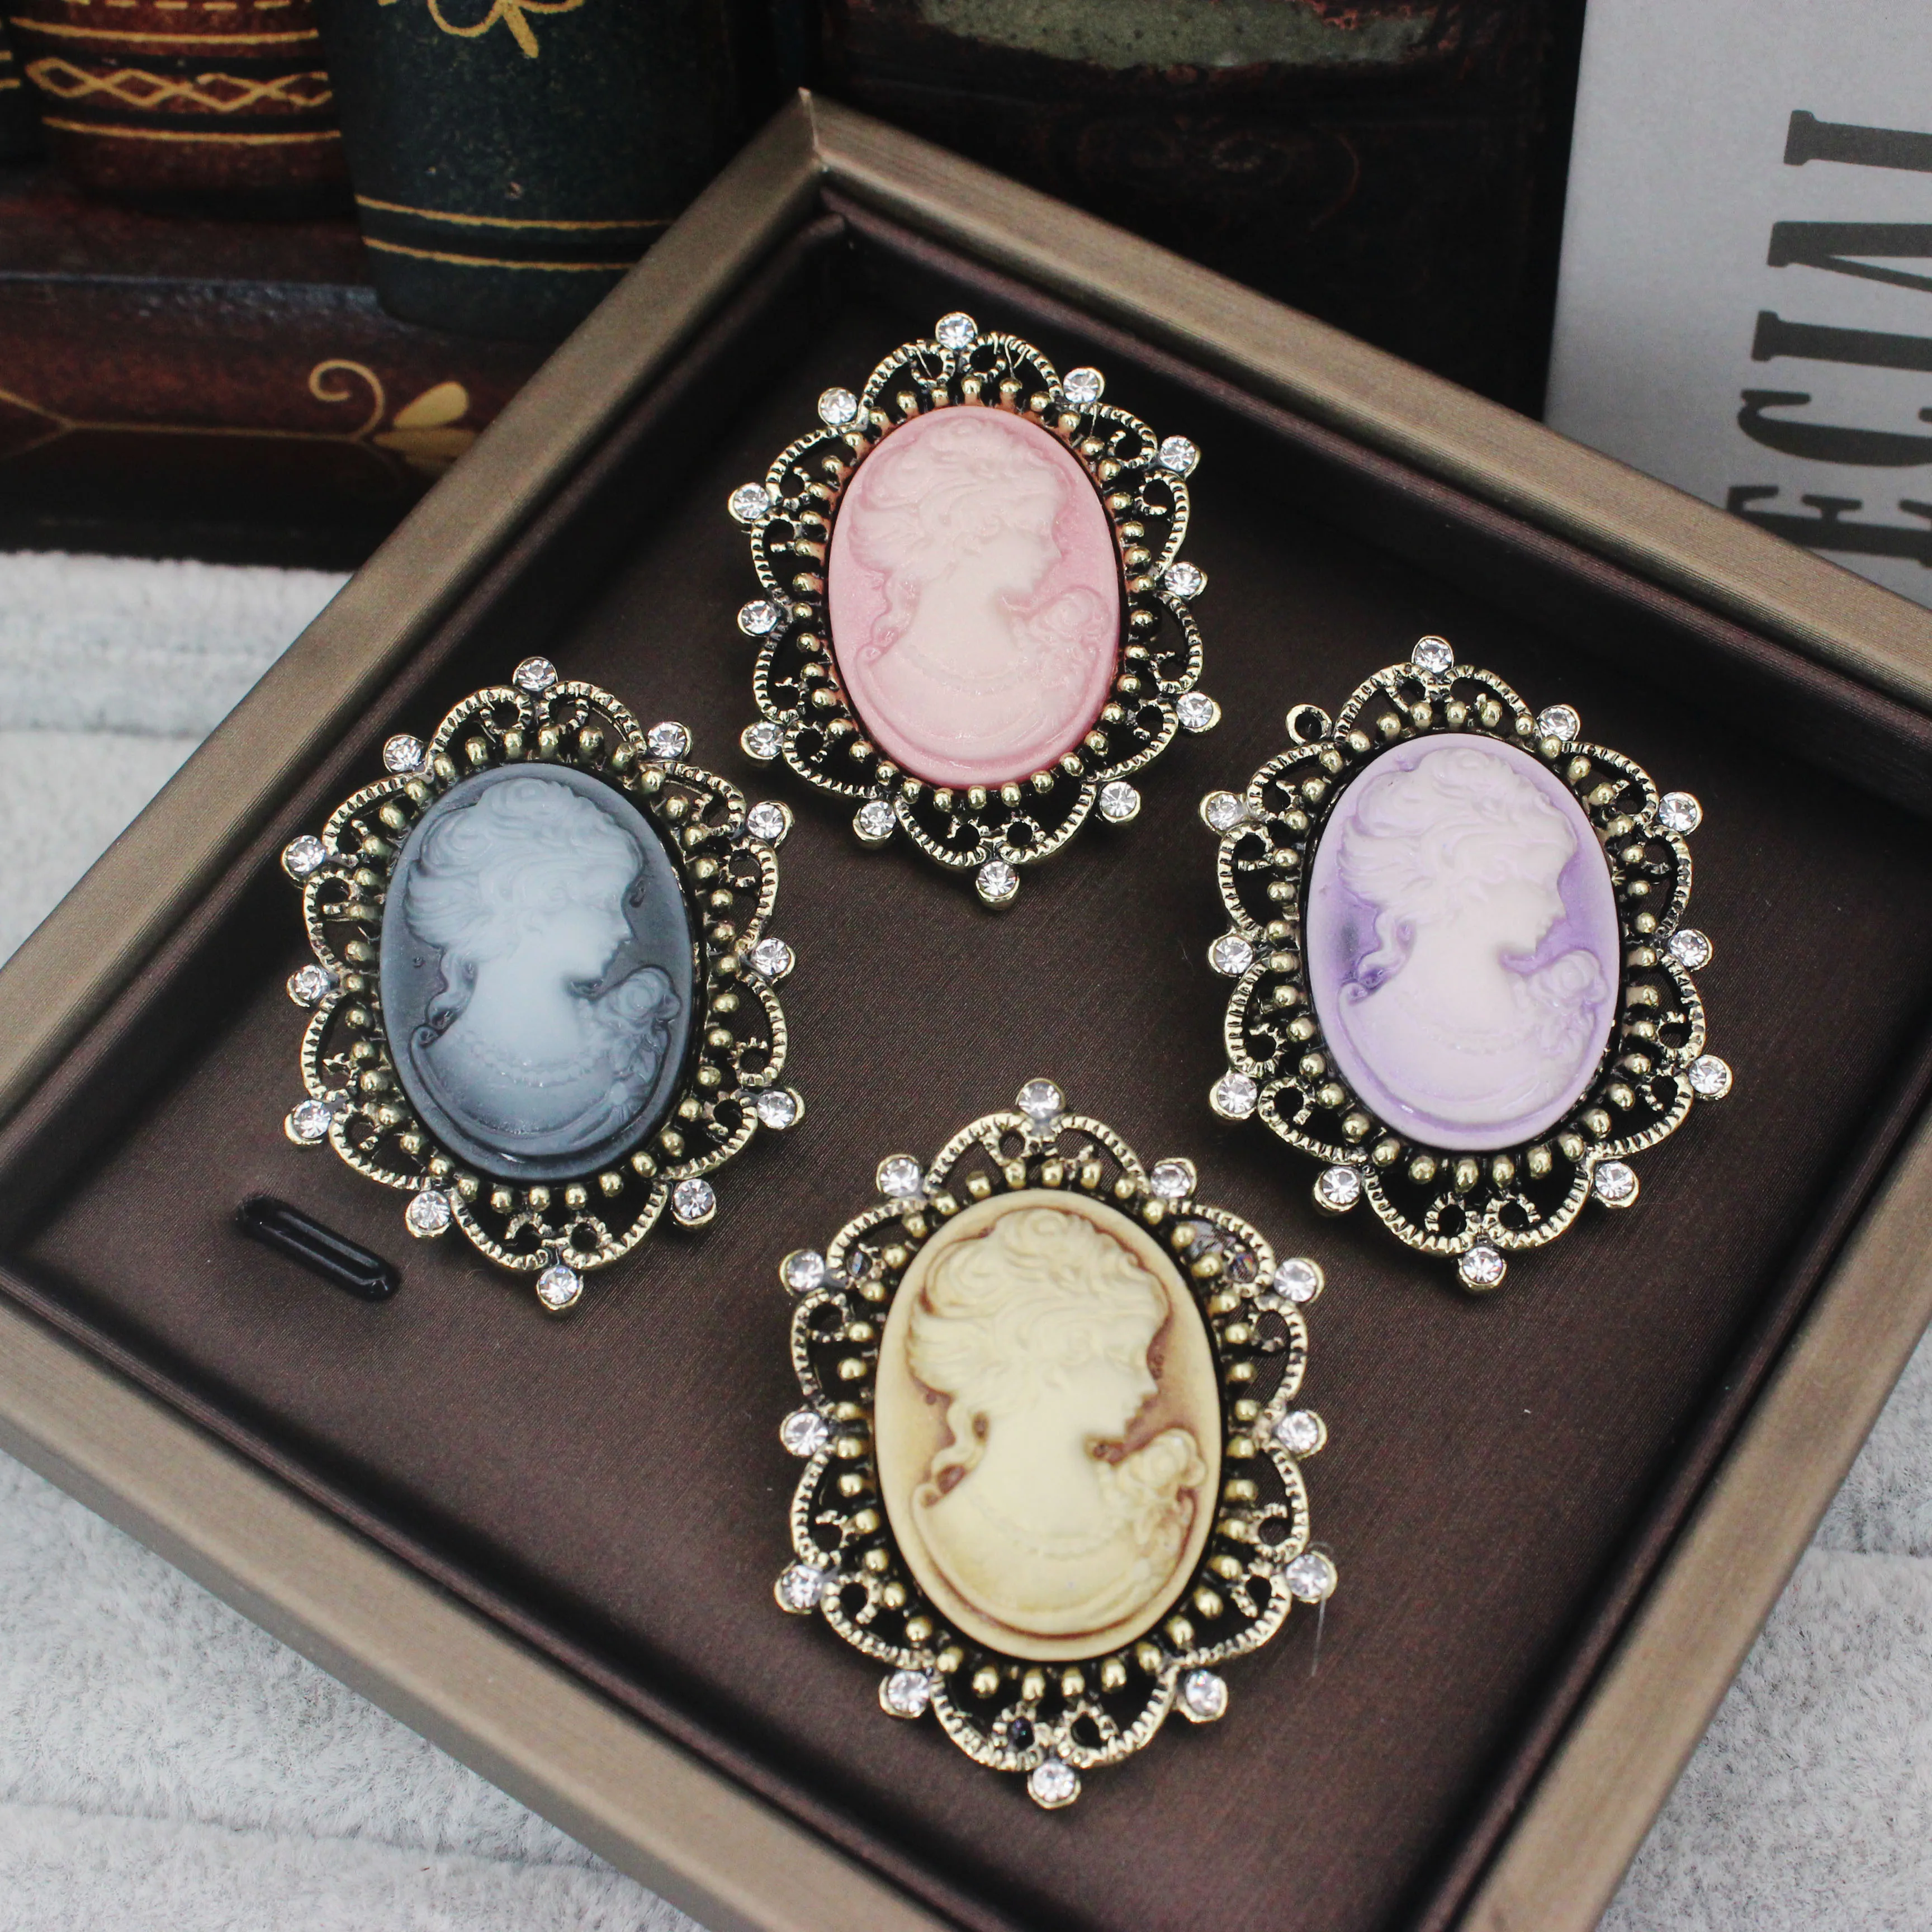 

3PCS Pack Vintage Queen's Cameo Brooch Pins for Women New Jewelry Ornaments Crystals Beauty Head Brooches Clothing Accessory